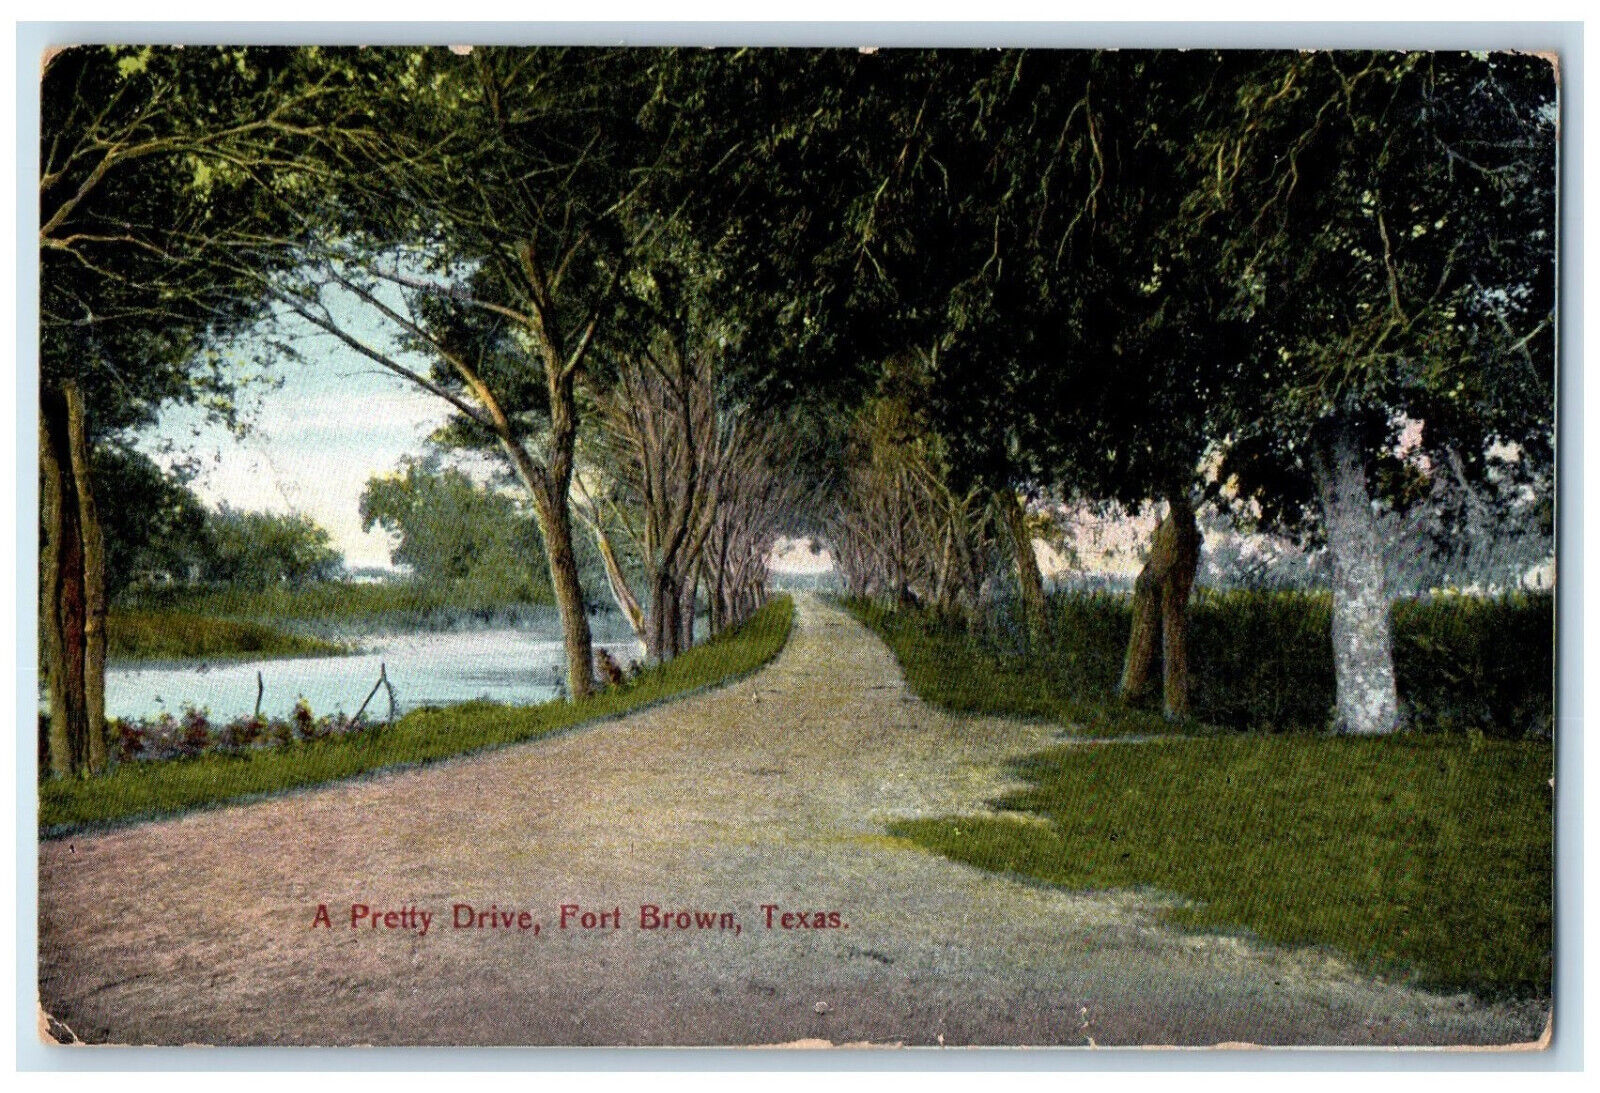 1908 A Pretty Drive View Tree-lined Dirt Road View Forth Brown Texas TX Postcard